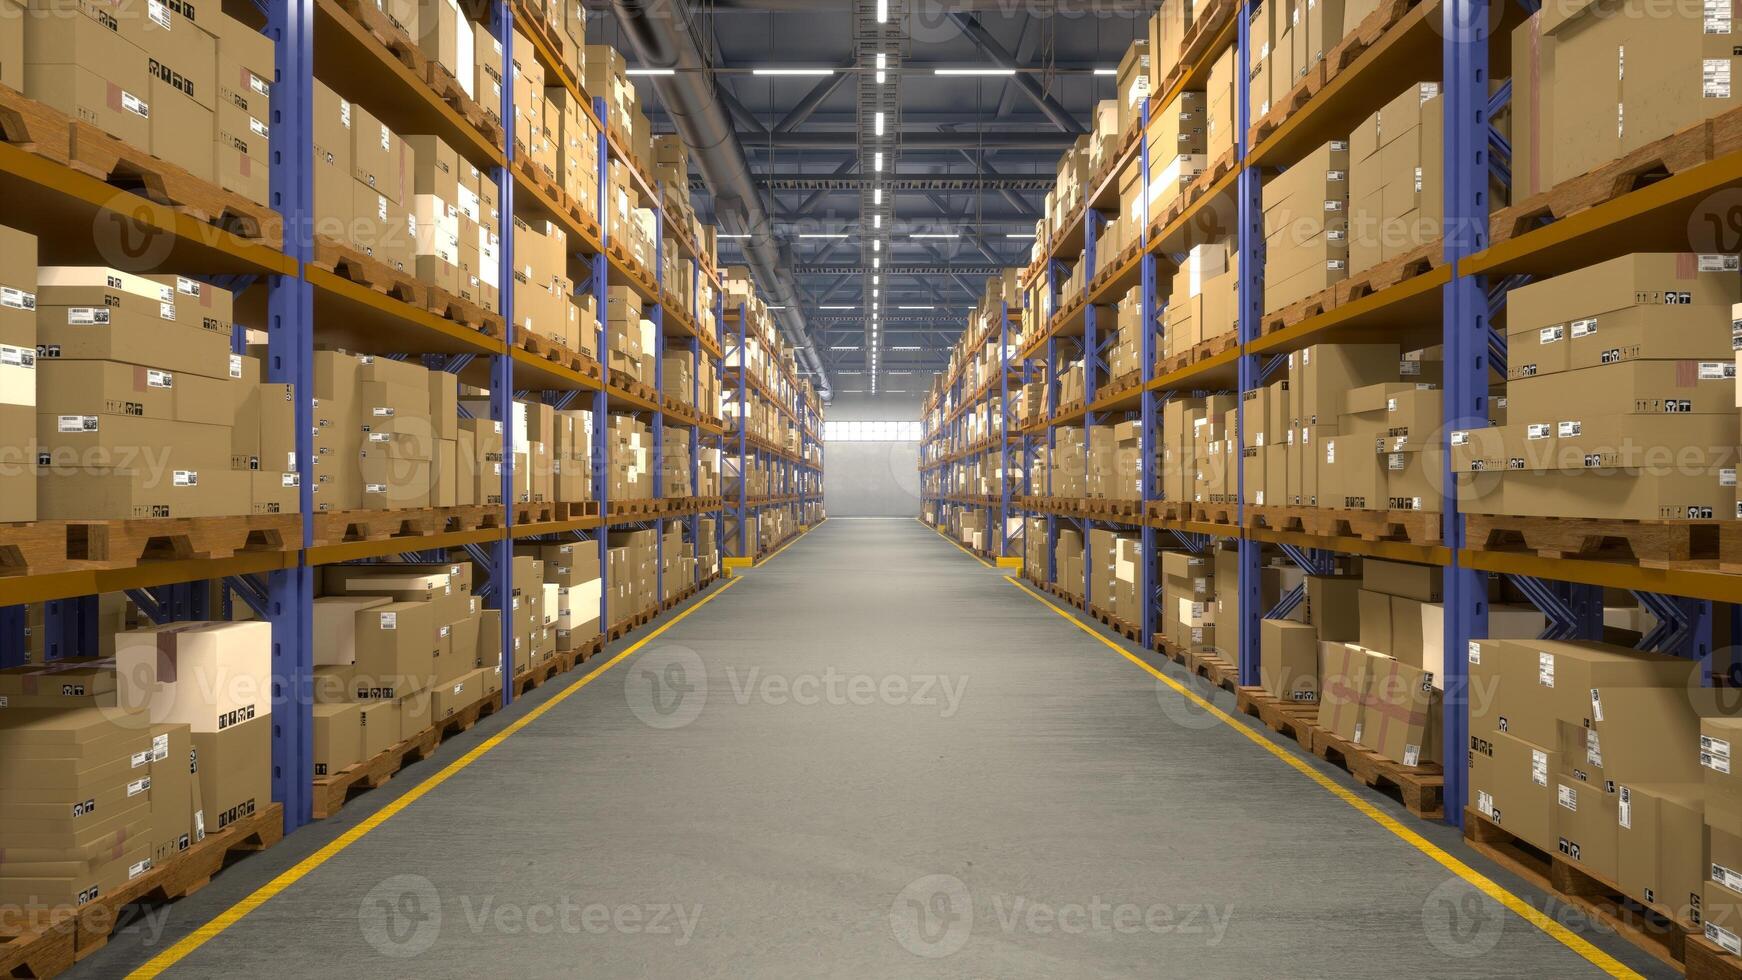 Industrial warehouse filled with storage boxes labeled for shipment, distribution center storing cargo for import export industry. Merchandise with air waybill tracking numbers. photo